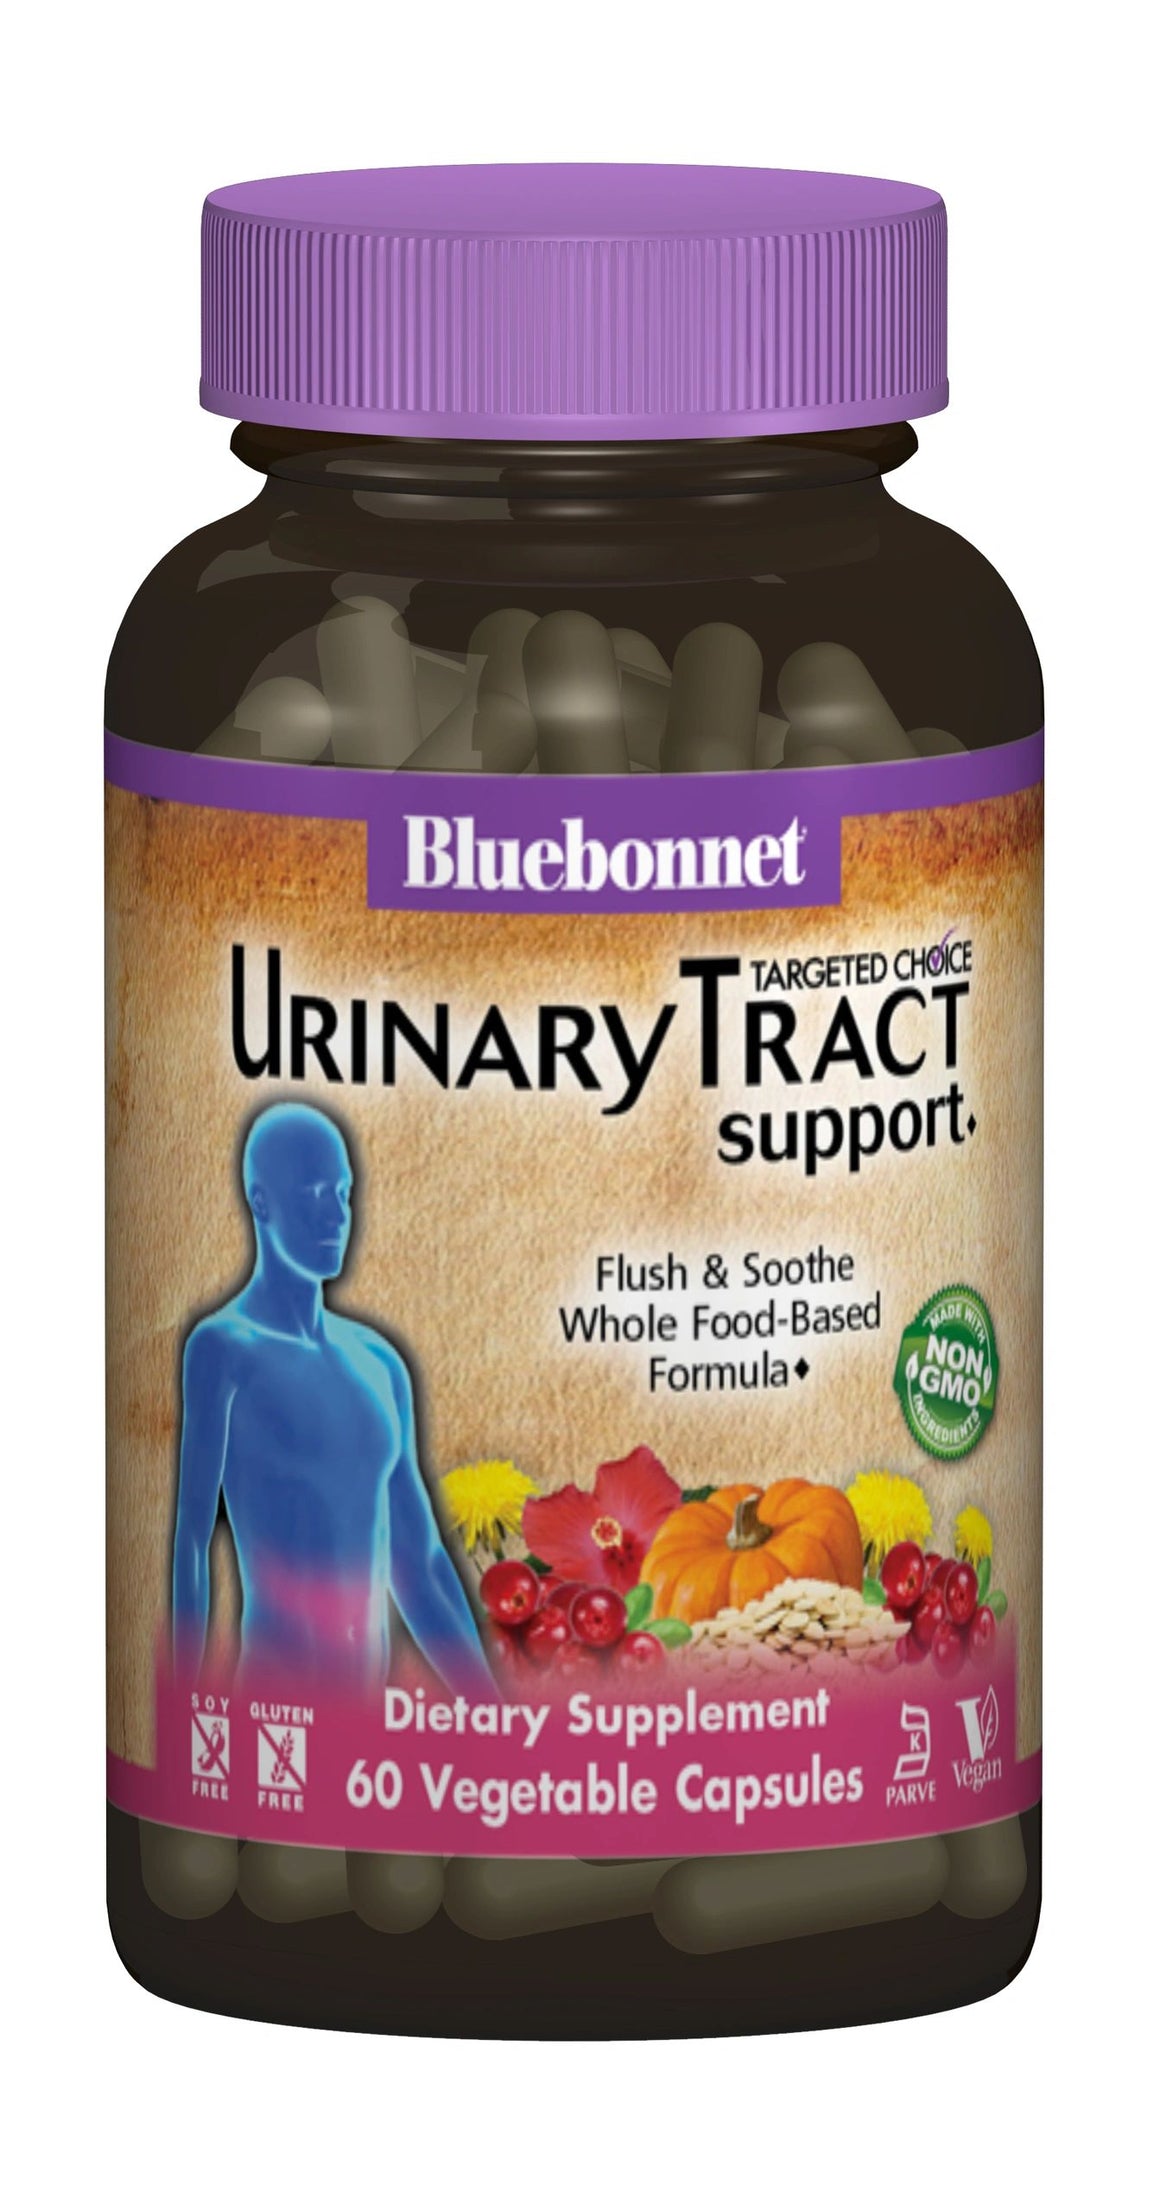 A bottle of Bluebonnet Targeted Choice® Urinary Tract Support